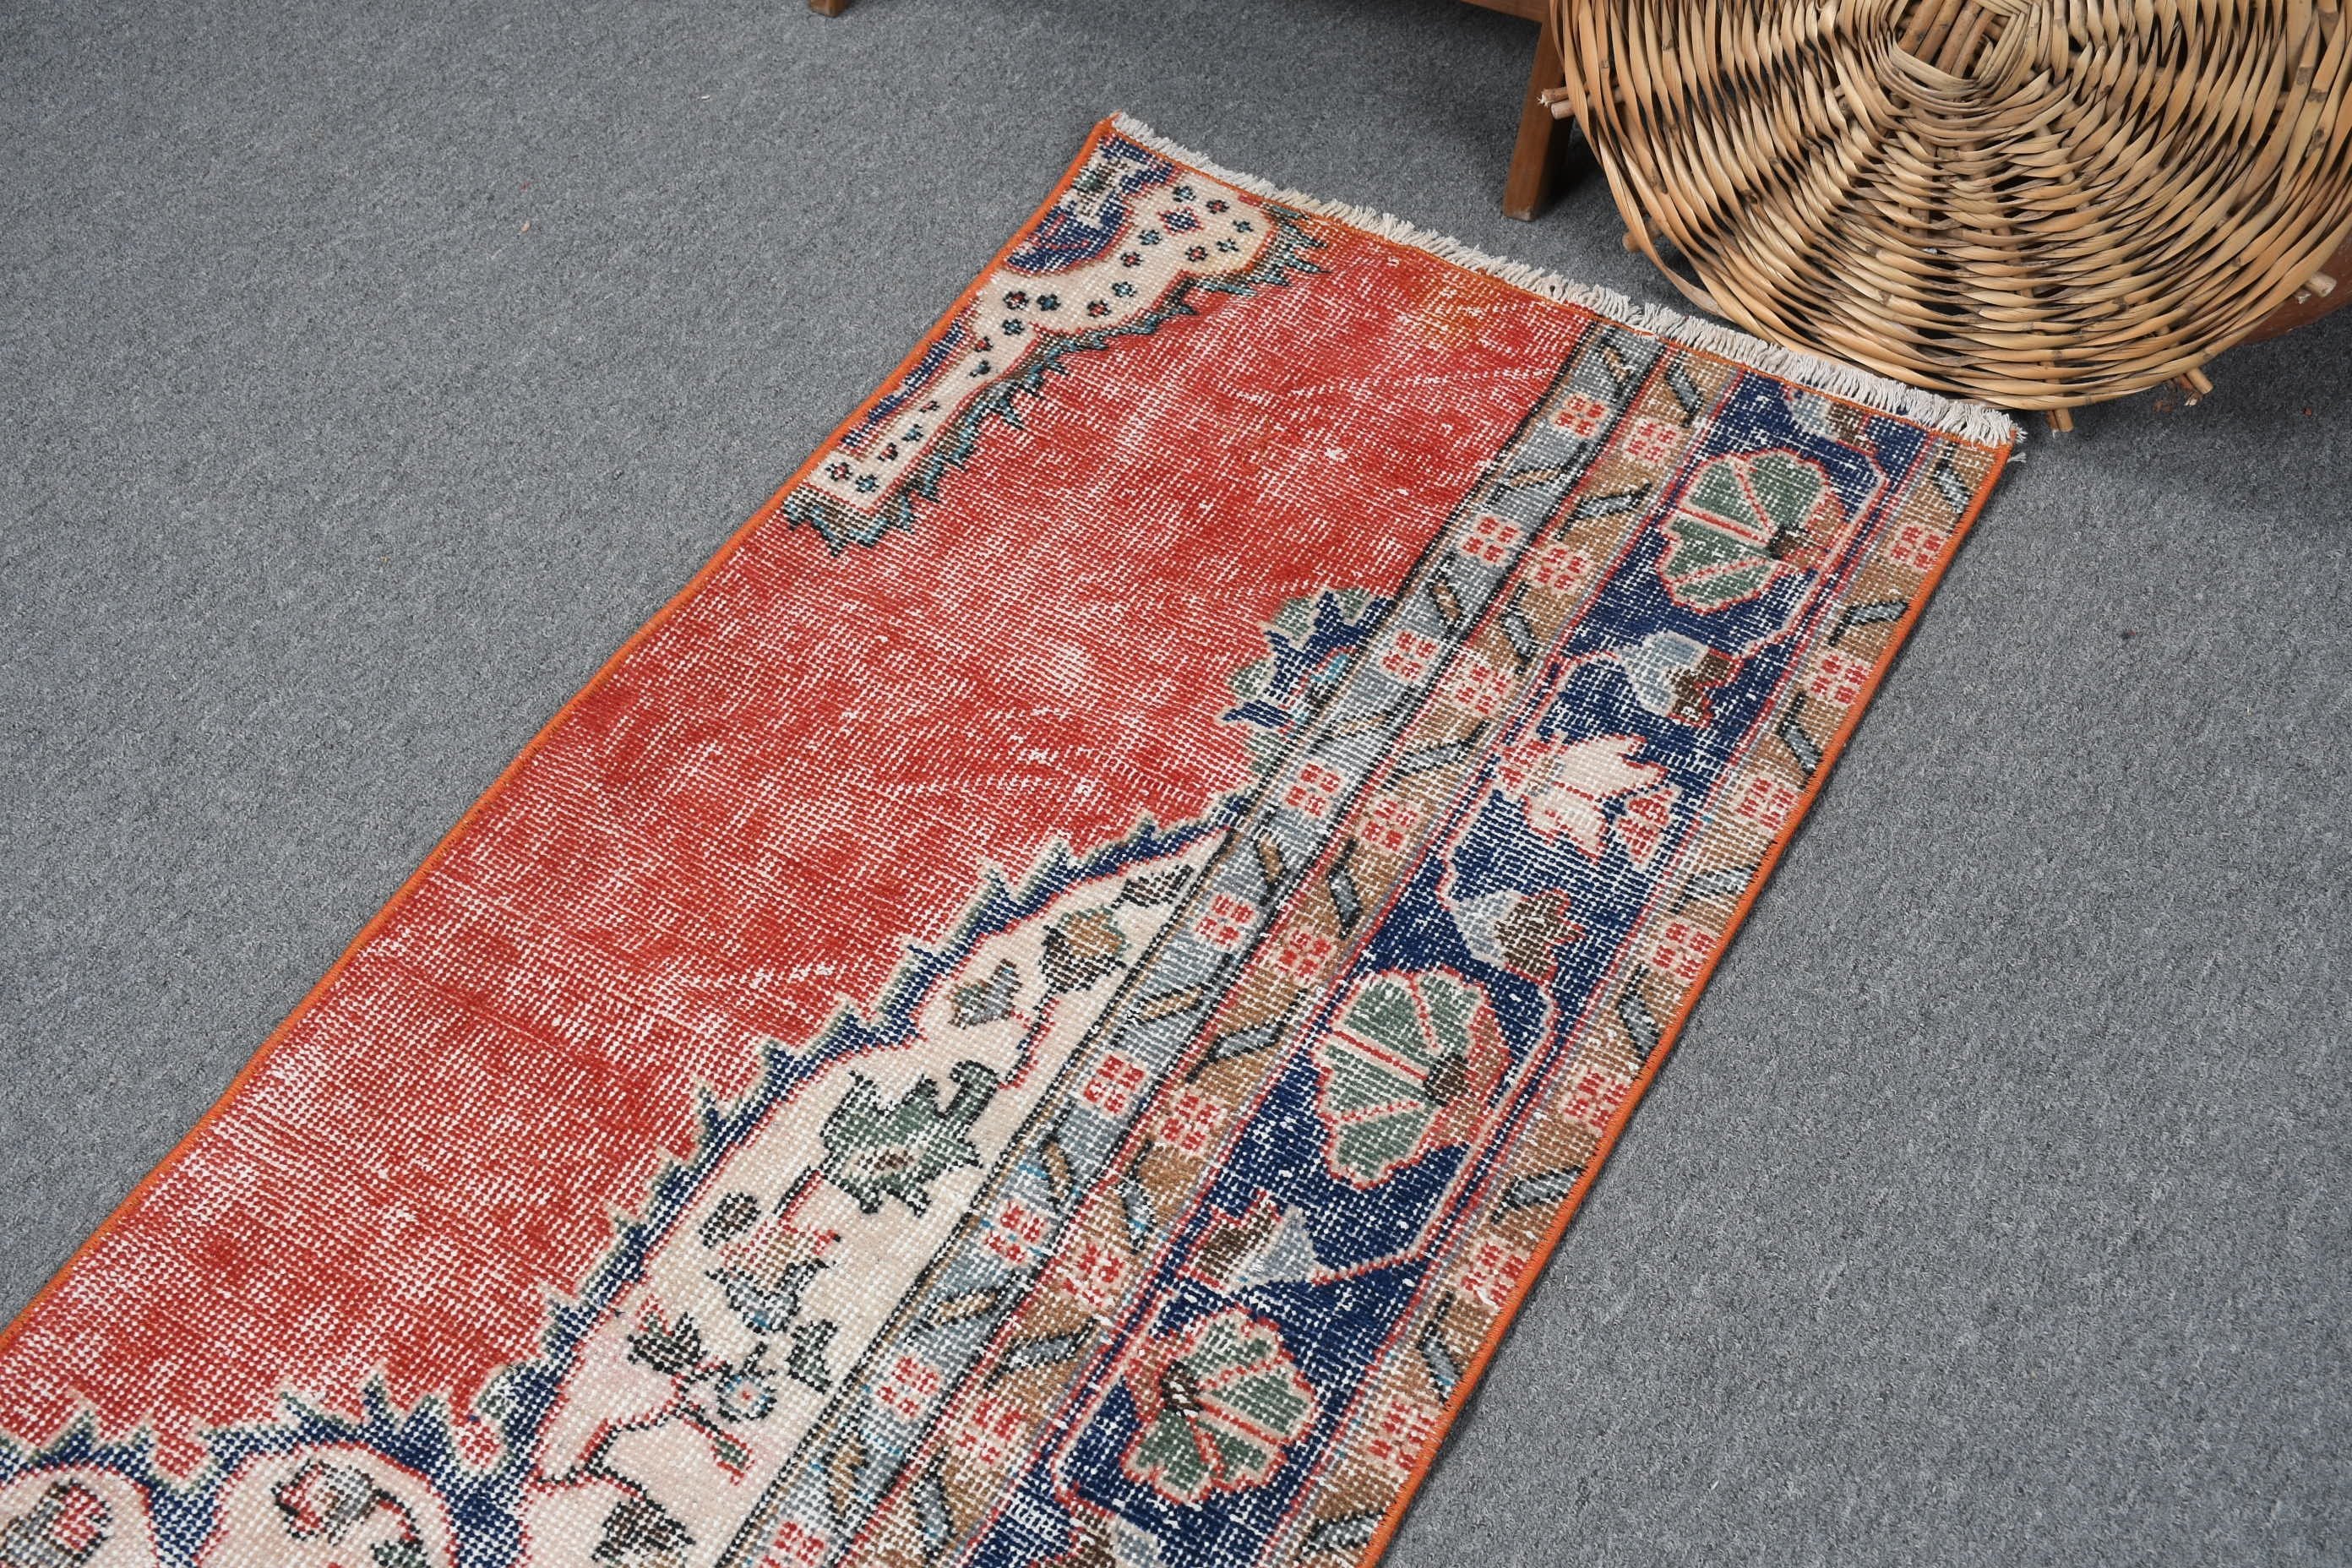 Office Rugs, Turkish Rugs, Home Decor Rug, Hallway Rug, 2x5.2 ft Runner Rug, Rugs for Runner, Vintage Rug, Red Anatolian Rug, Kitchen Rugs